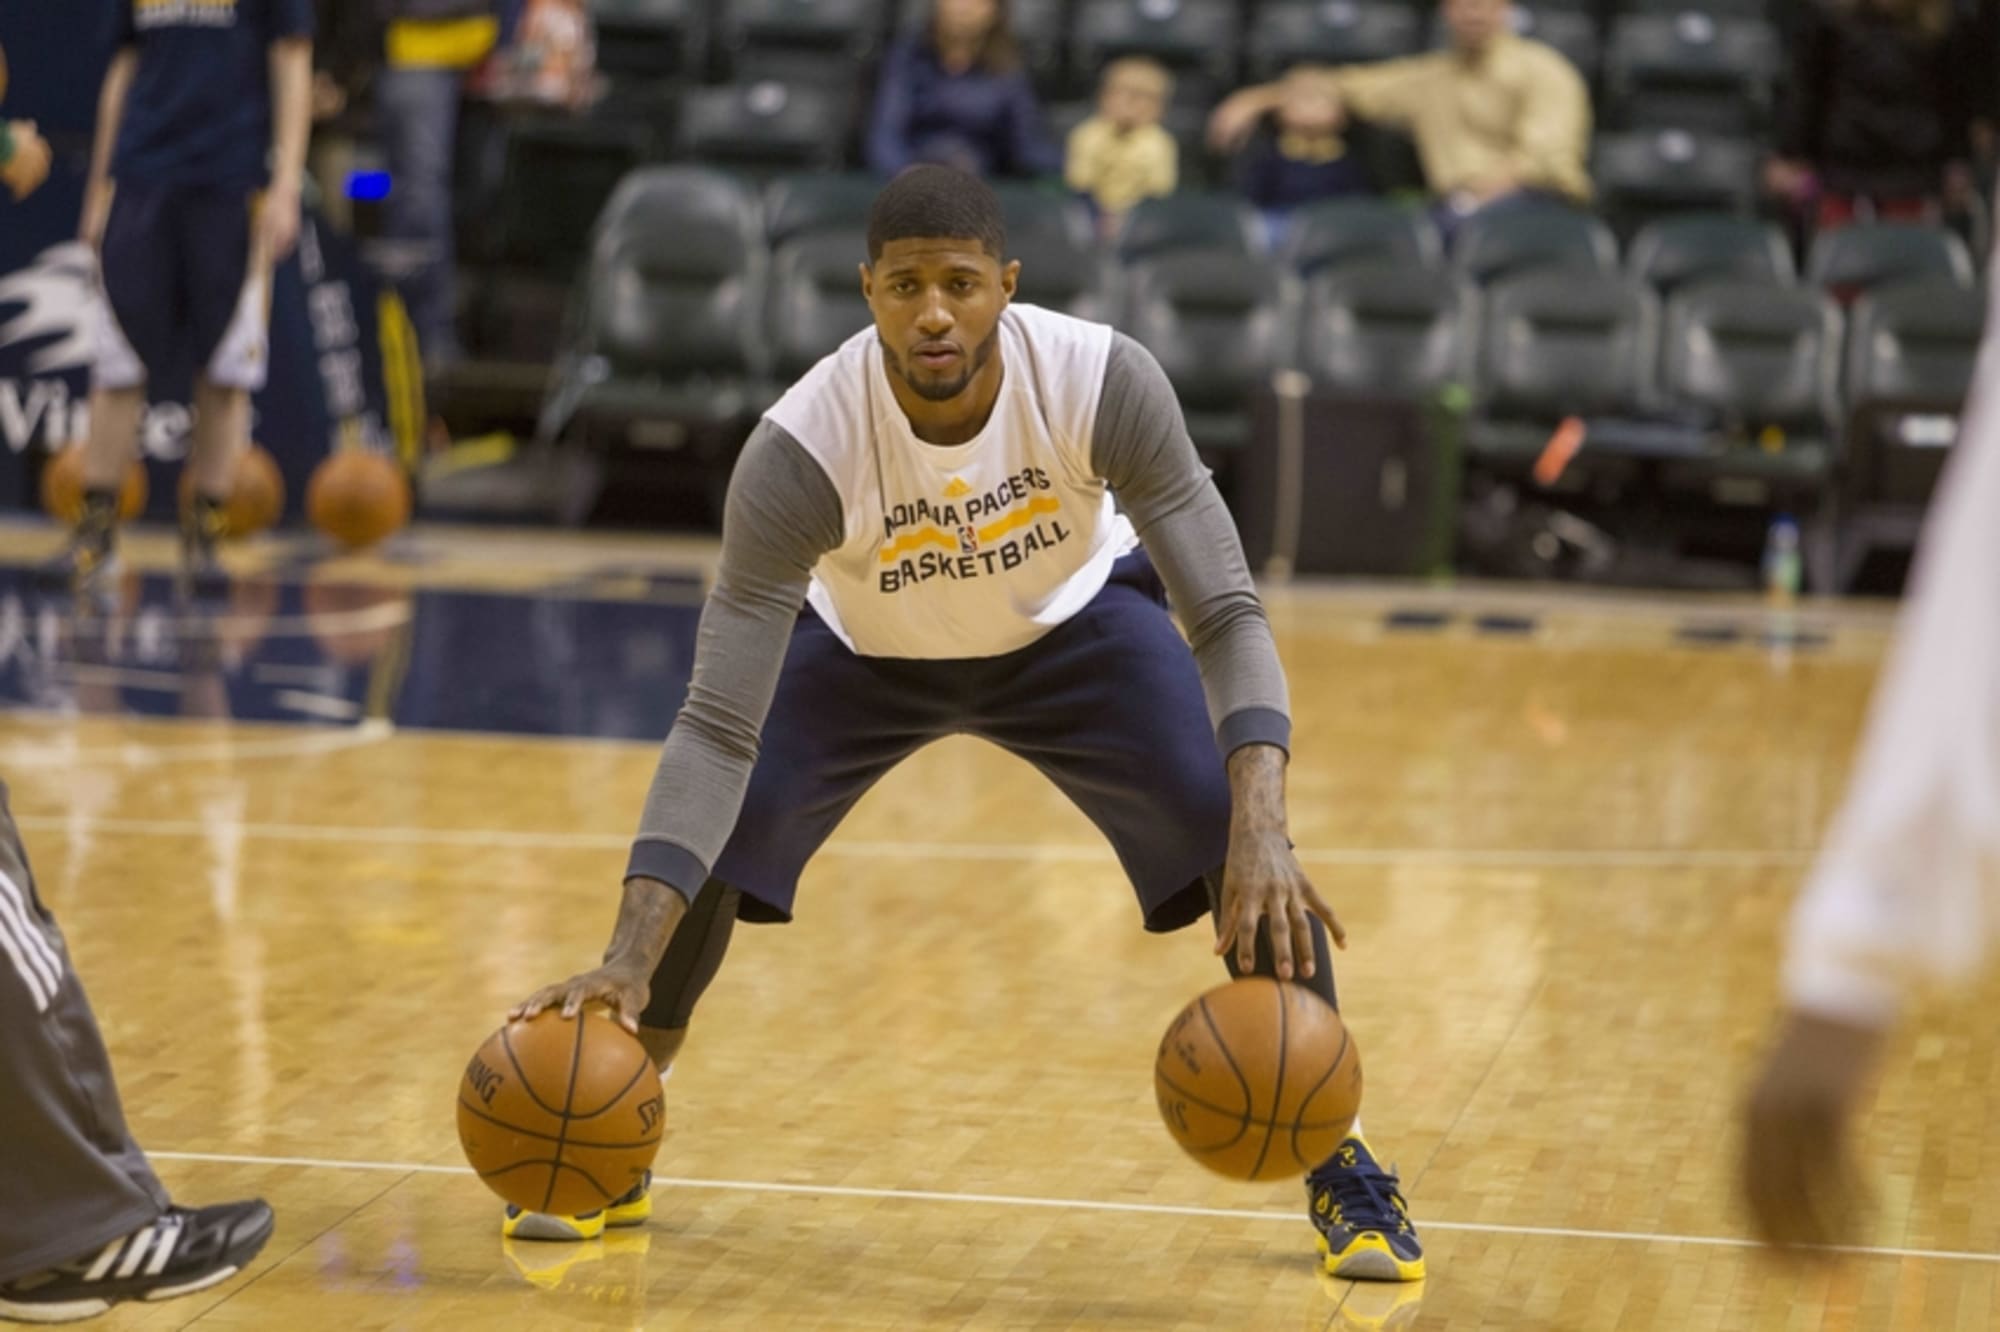 Watch: Paul George with 360 Windmill dunk